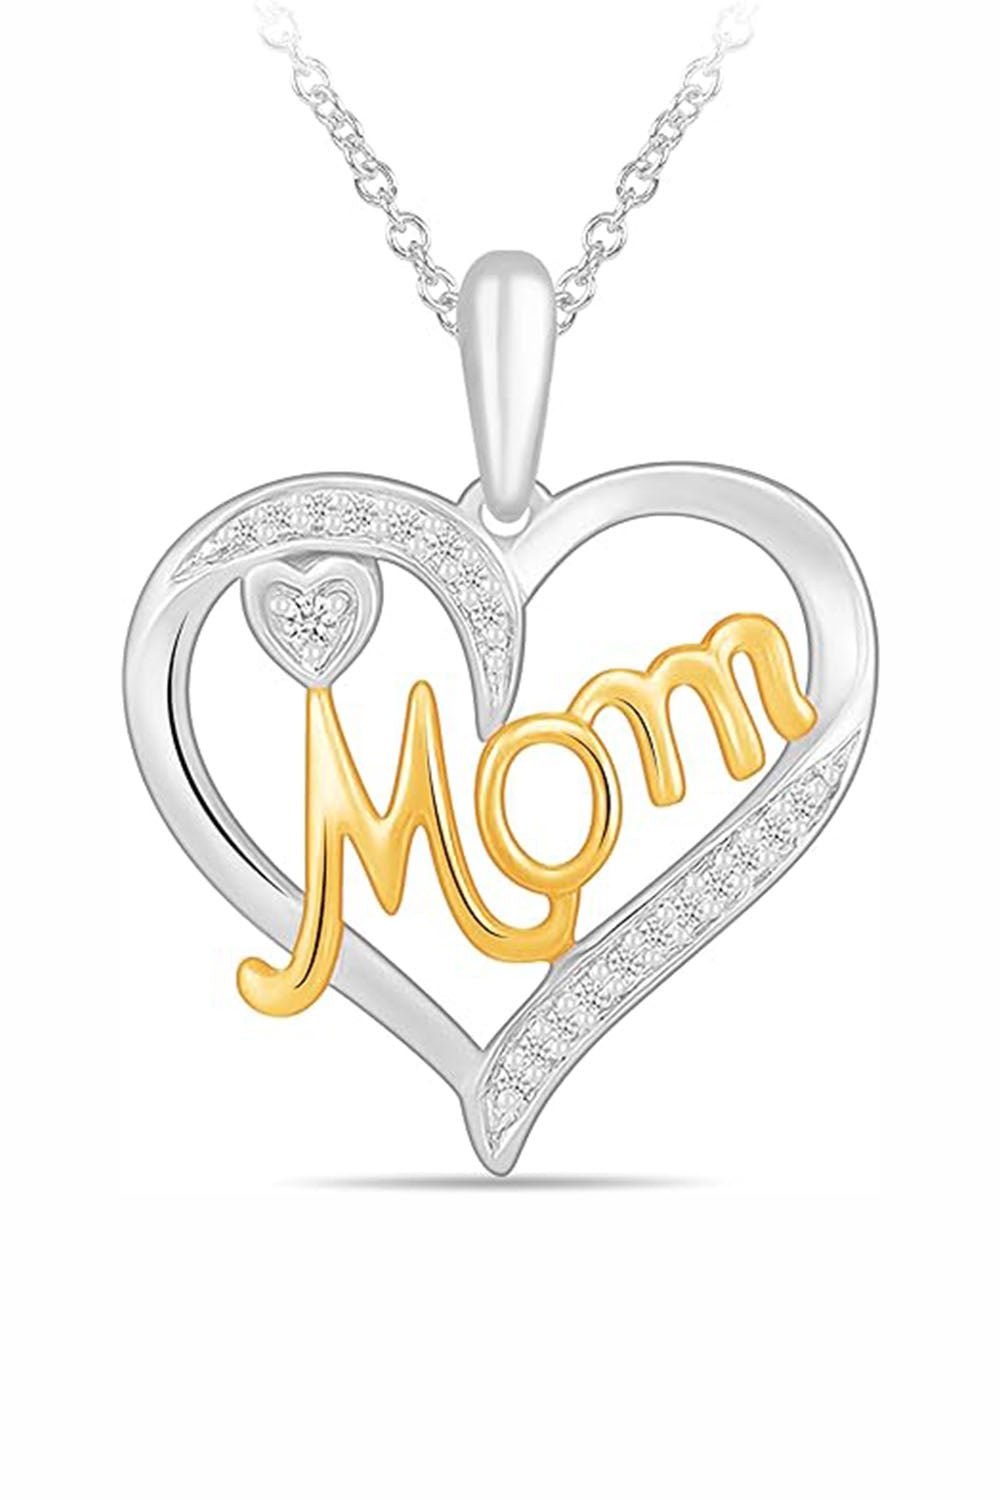 Yaathi 1/4 Carat Moissanite Double Heart Outline with Mom Pendant Necklace in 18k Tone Tone Gold Over Sterling Silver Jewellery.